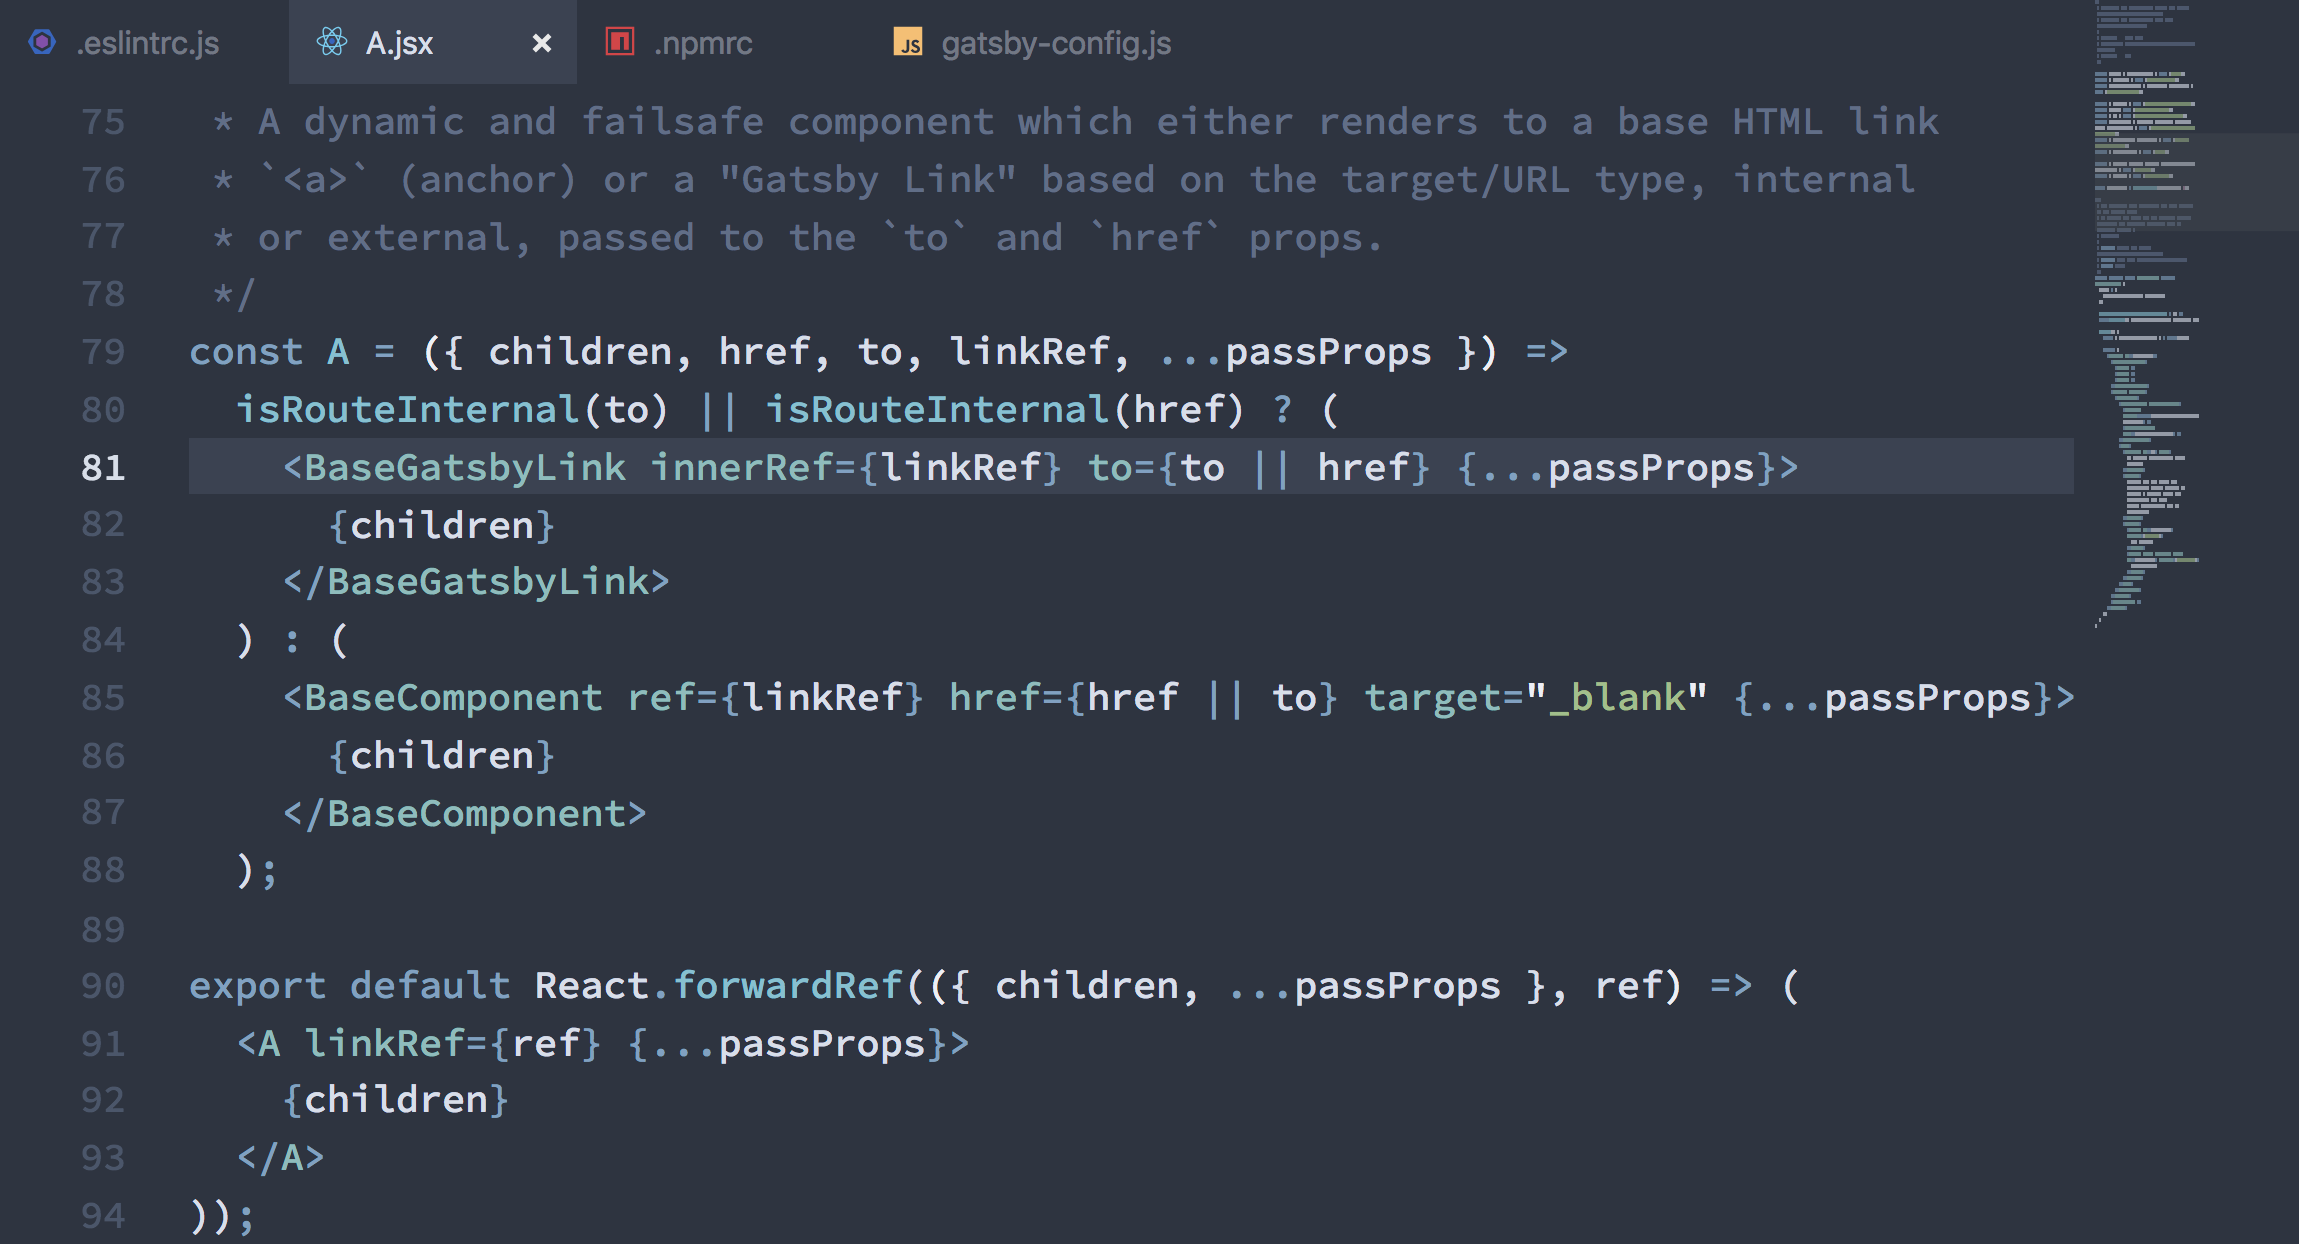 Screenshot showing a React JSX component with the minimap package to keep an overall overview of the whole file